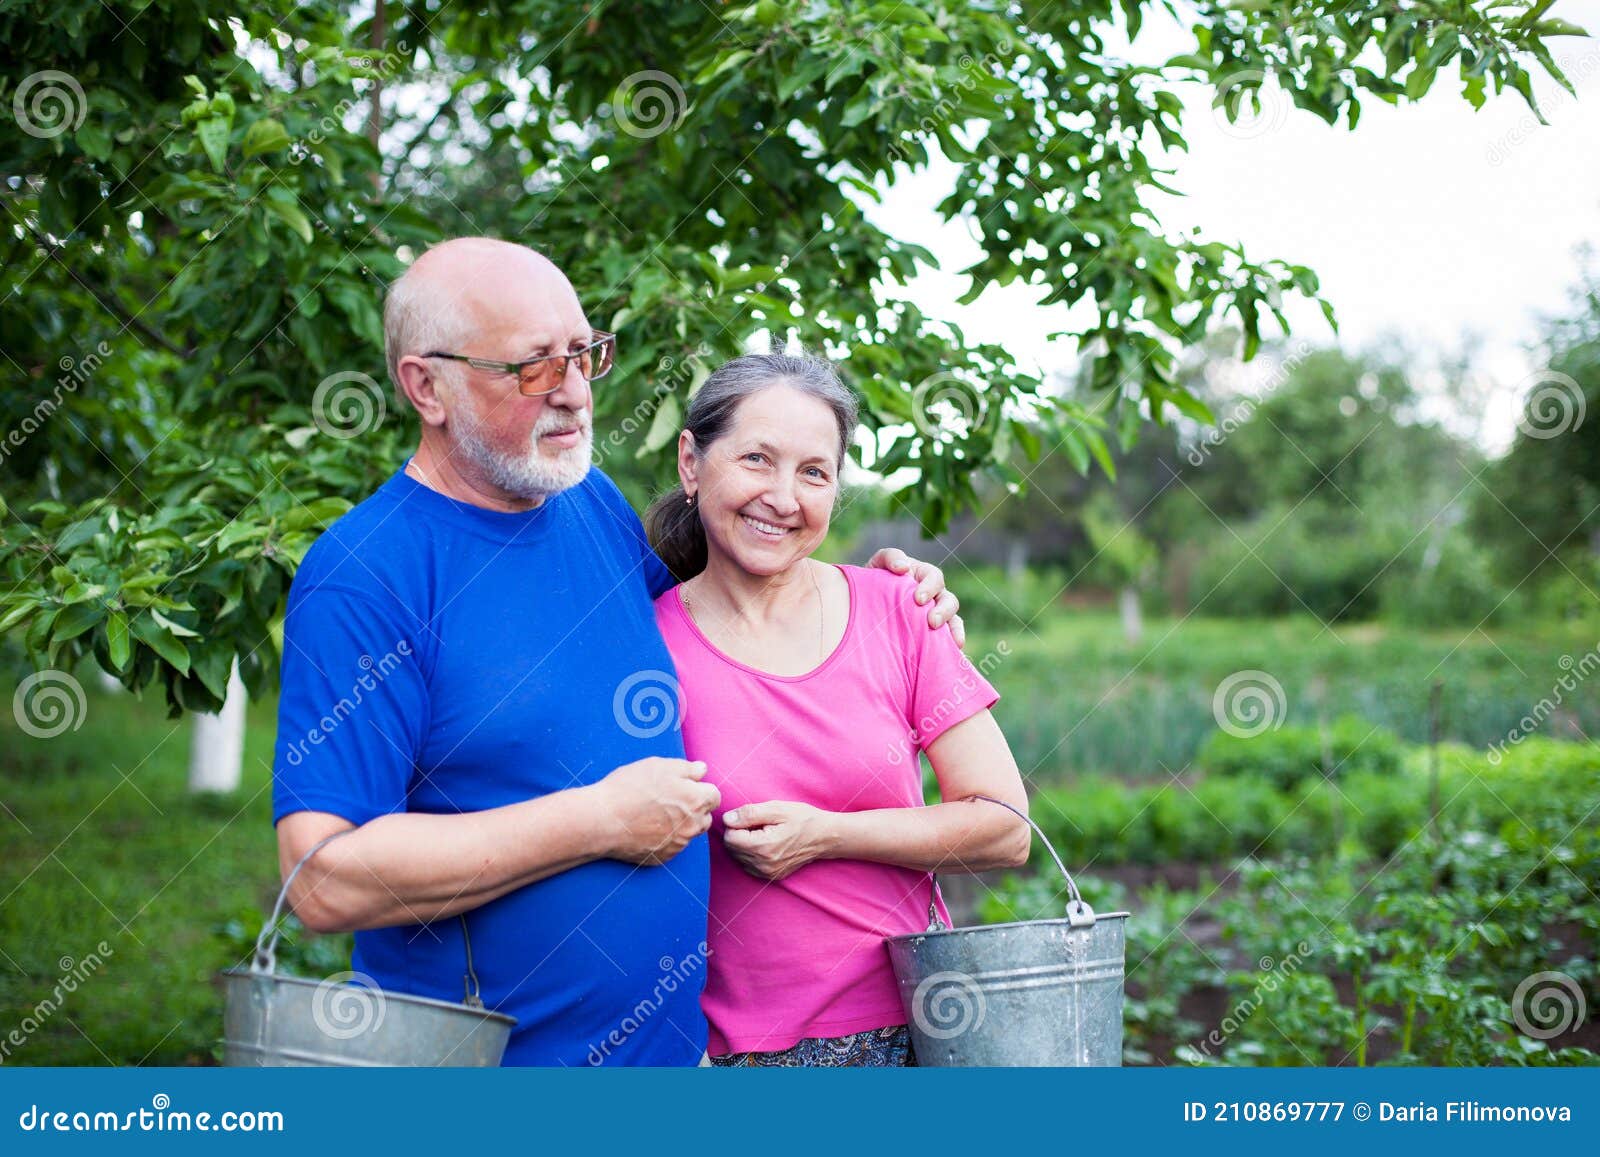 Mature Men and Women at Garden Works Stock Image - Image of person ...